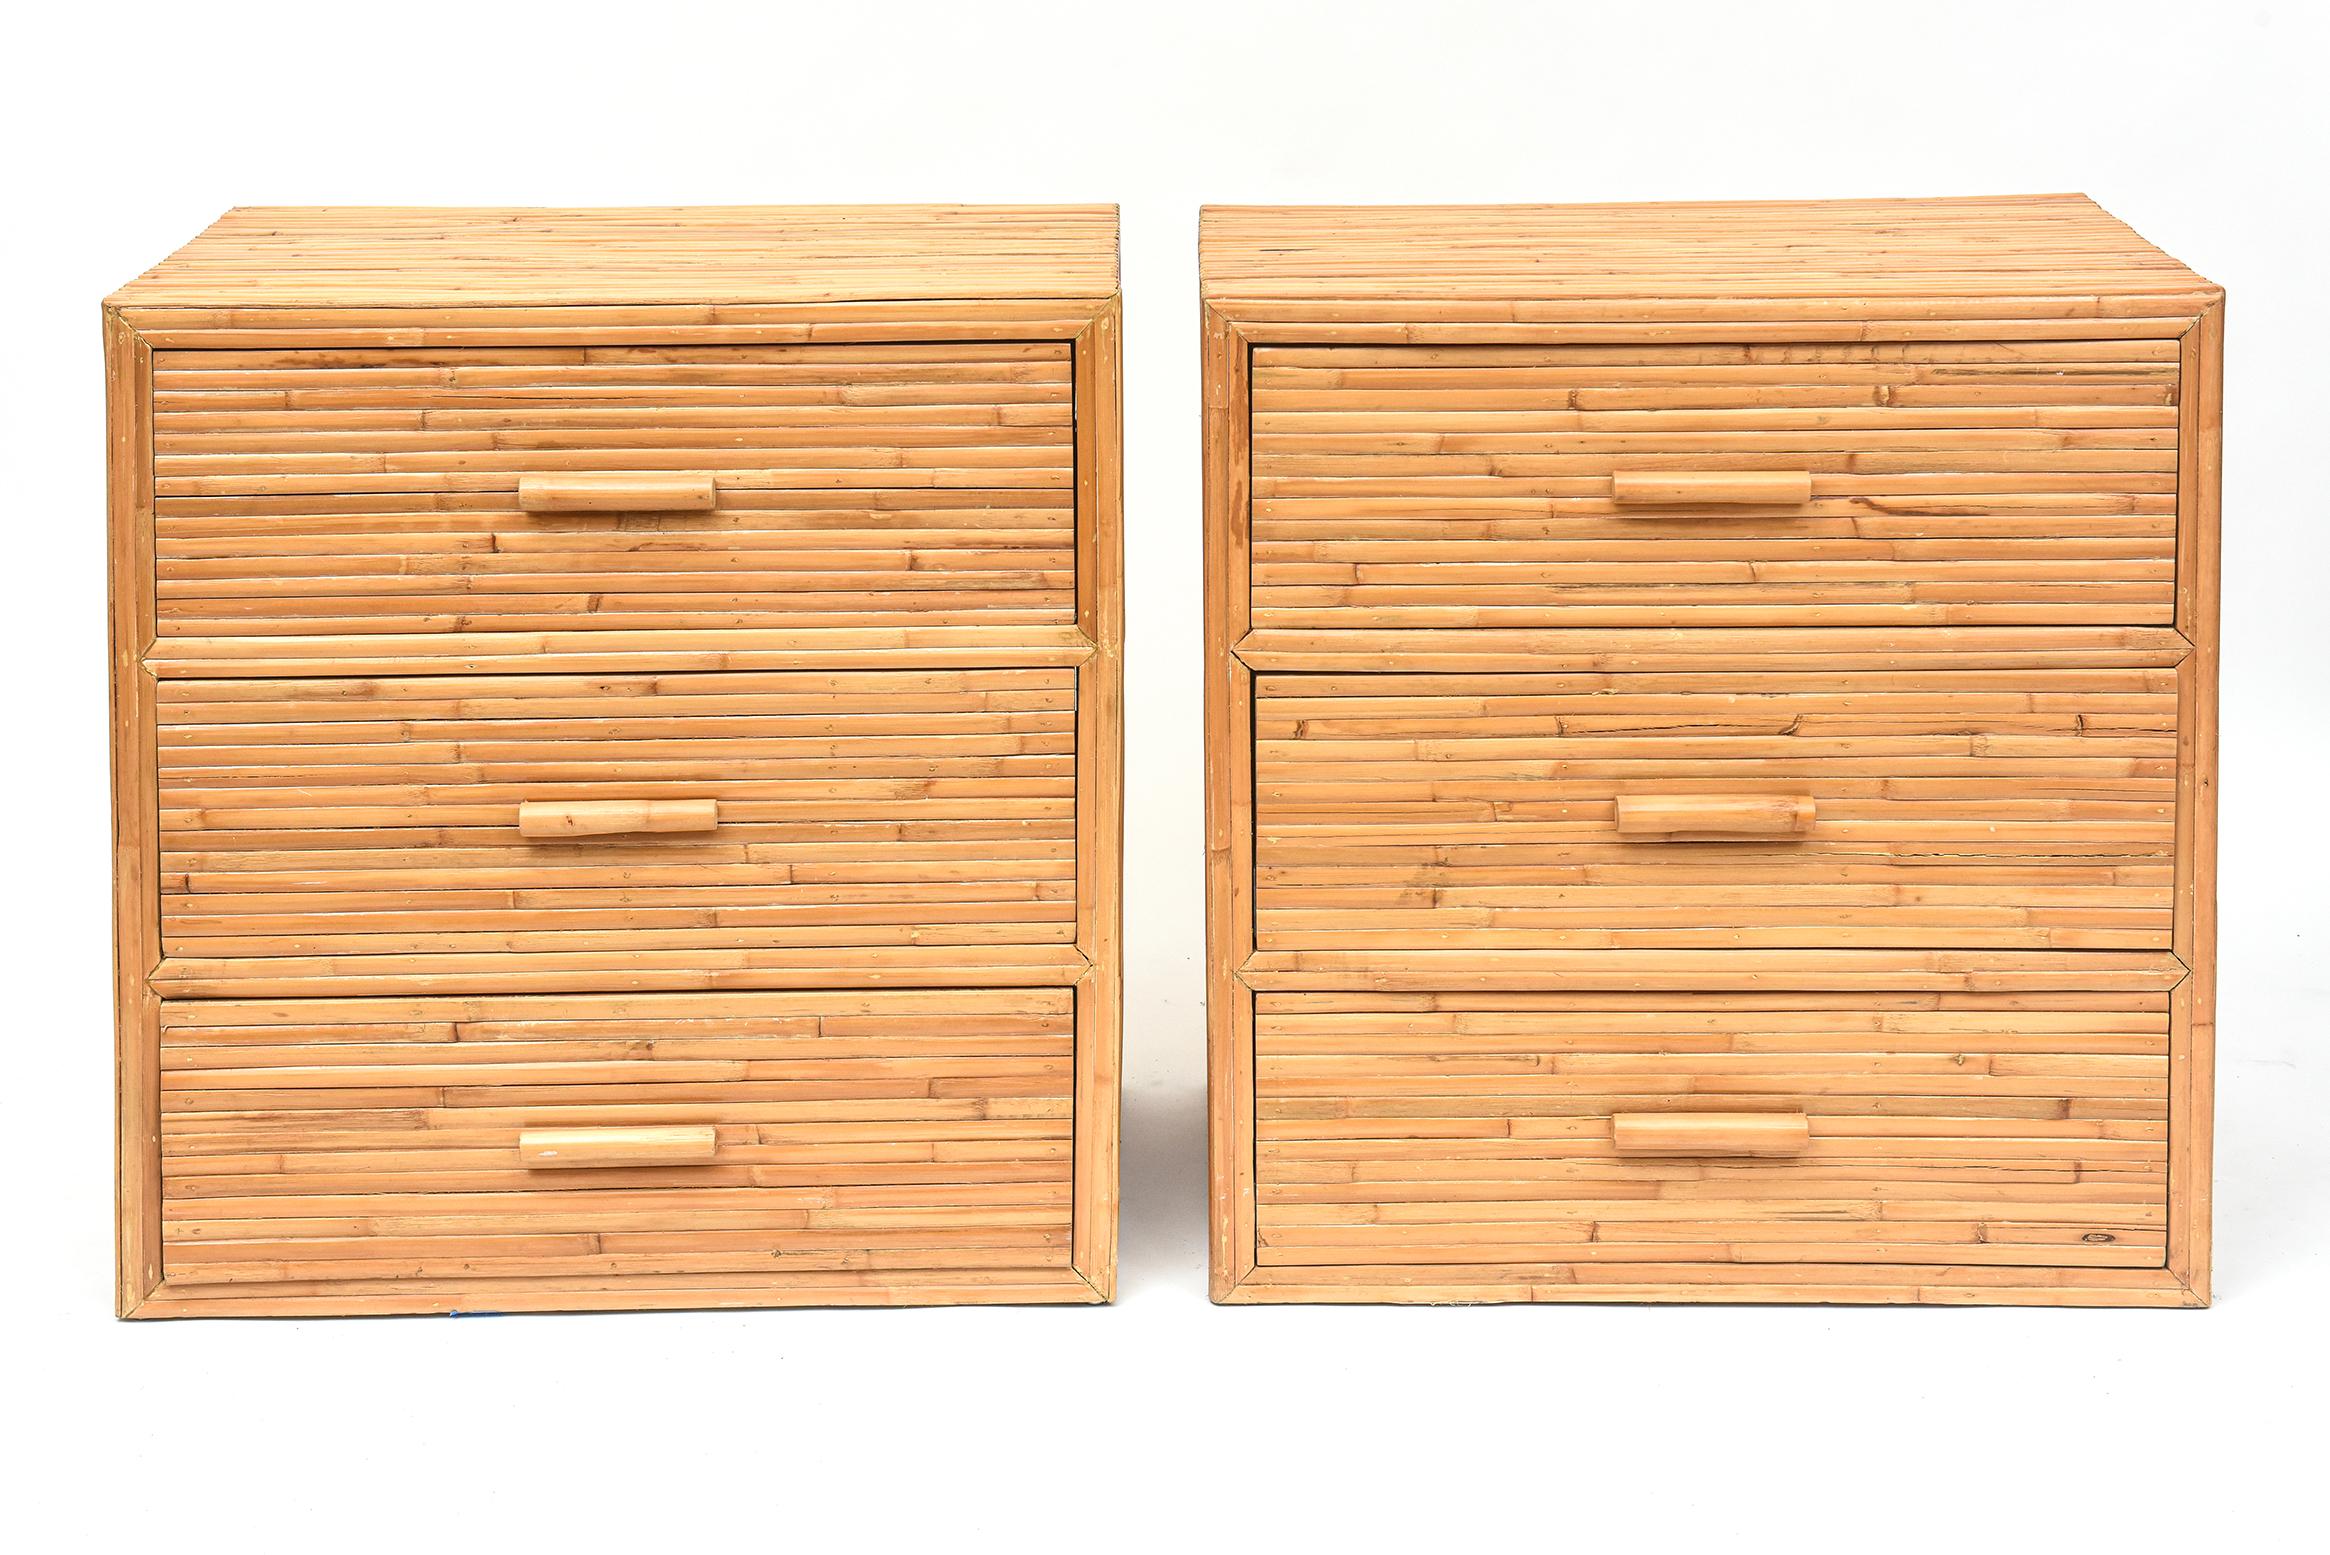 Our pair of 1970's bamboo bachelor chests prove that an interesting material can make the simplest of designs special. 